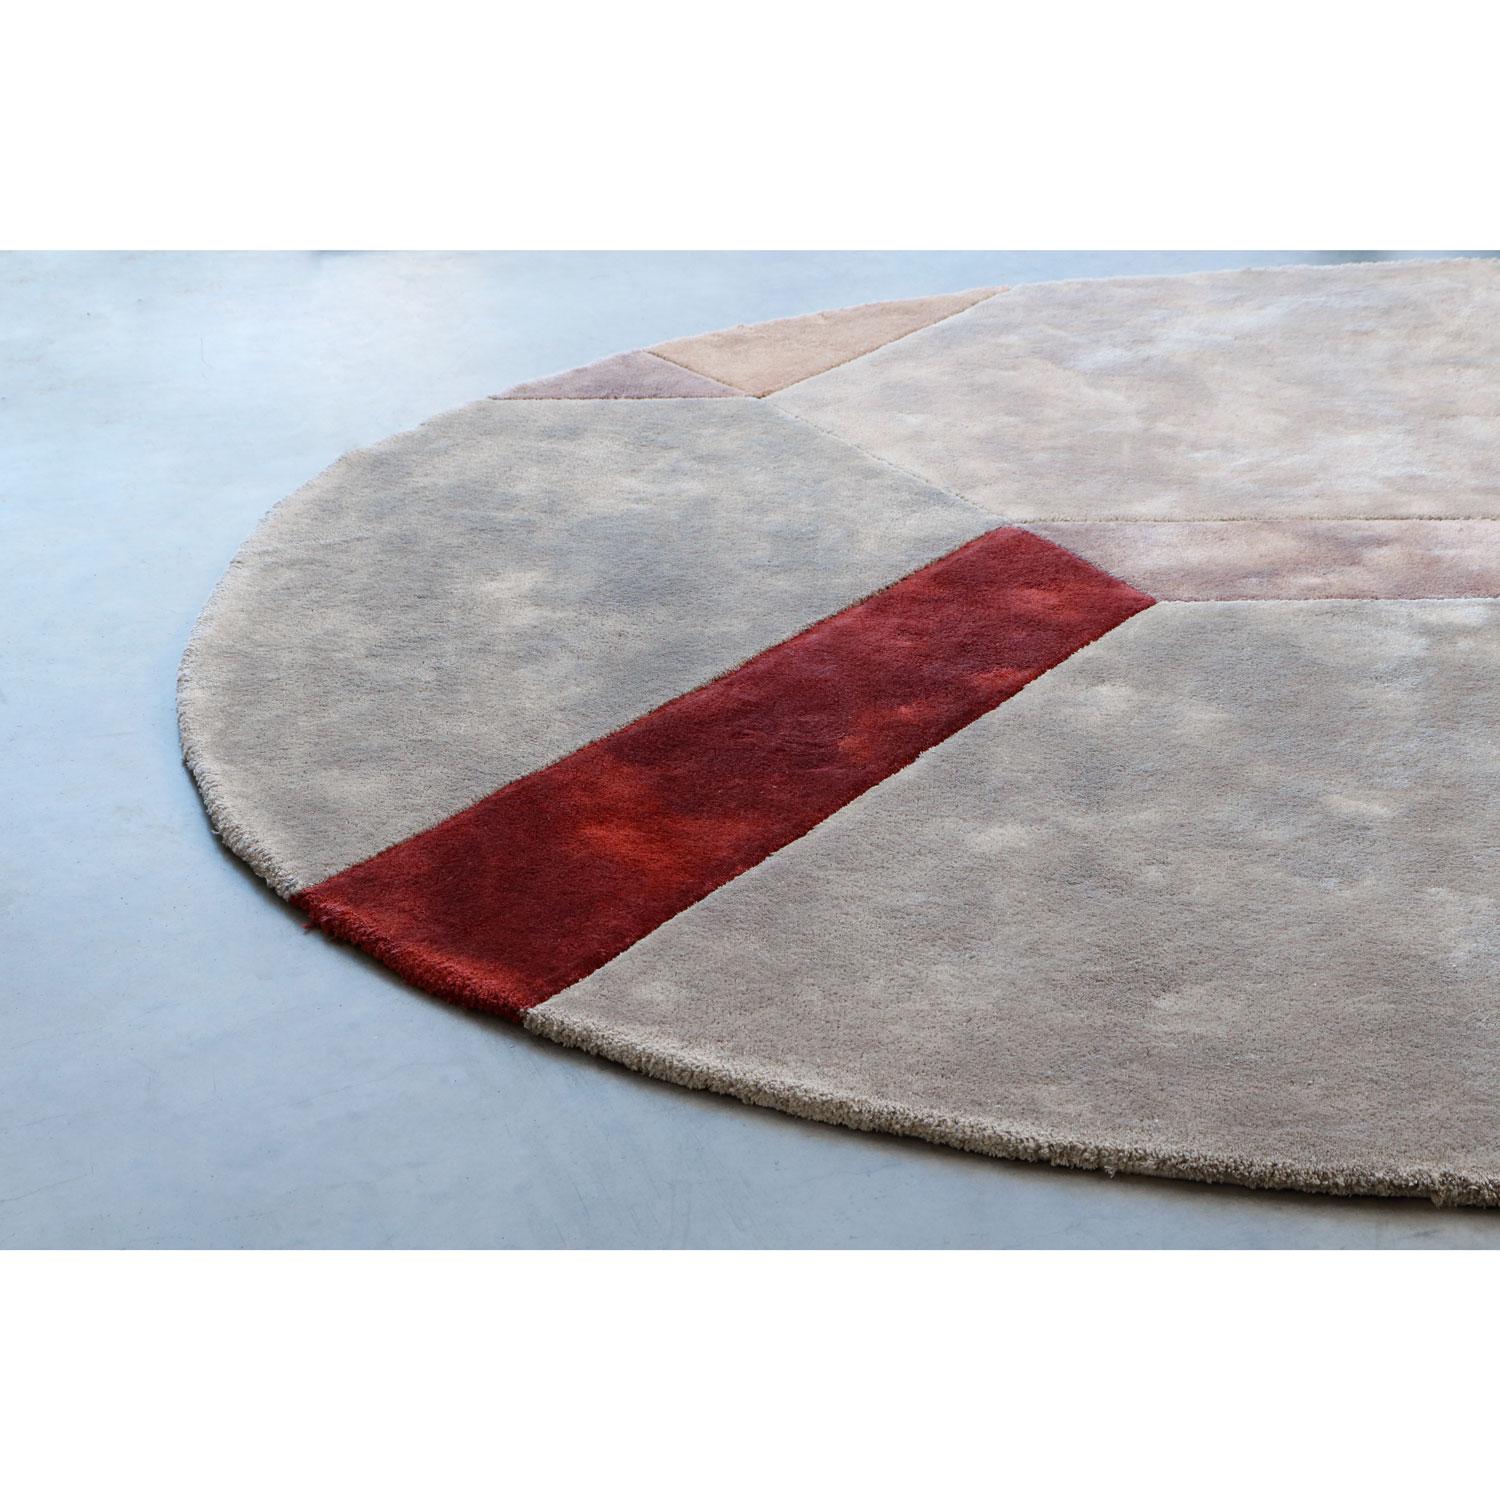 Other Modern Organic Shape Sustainable Soft Beige Rug by Deanna Comellini 220x260 cm For Sale